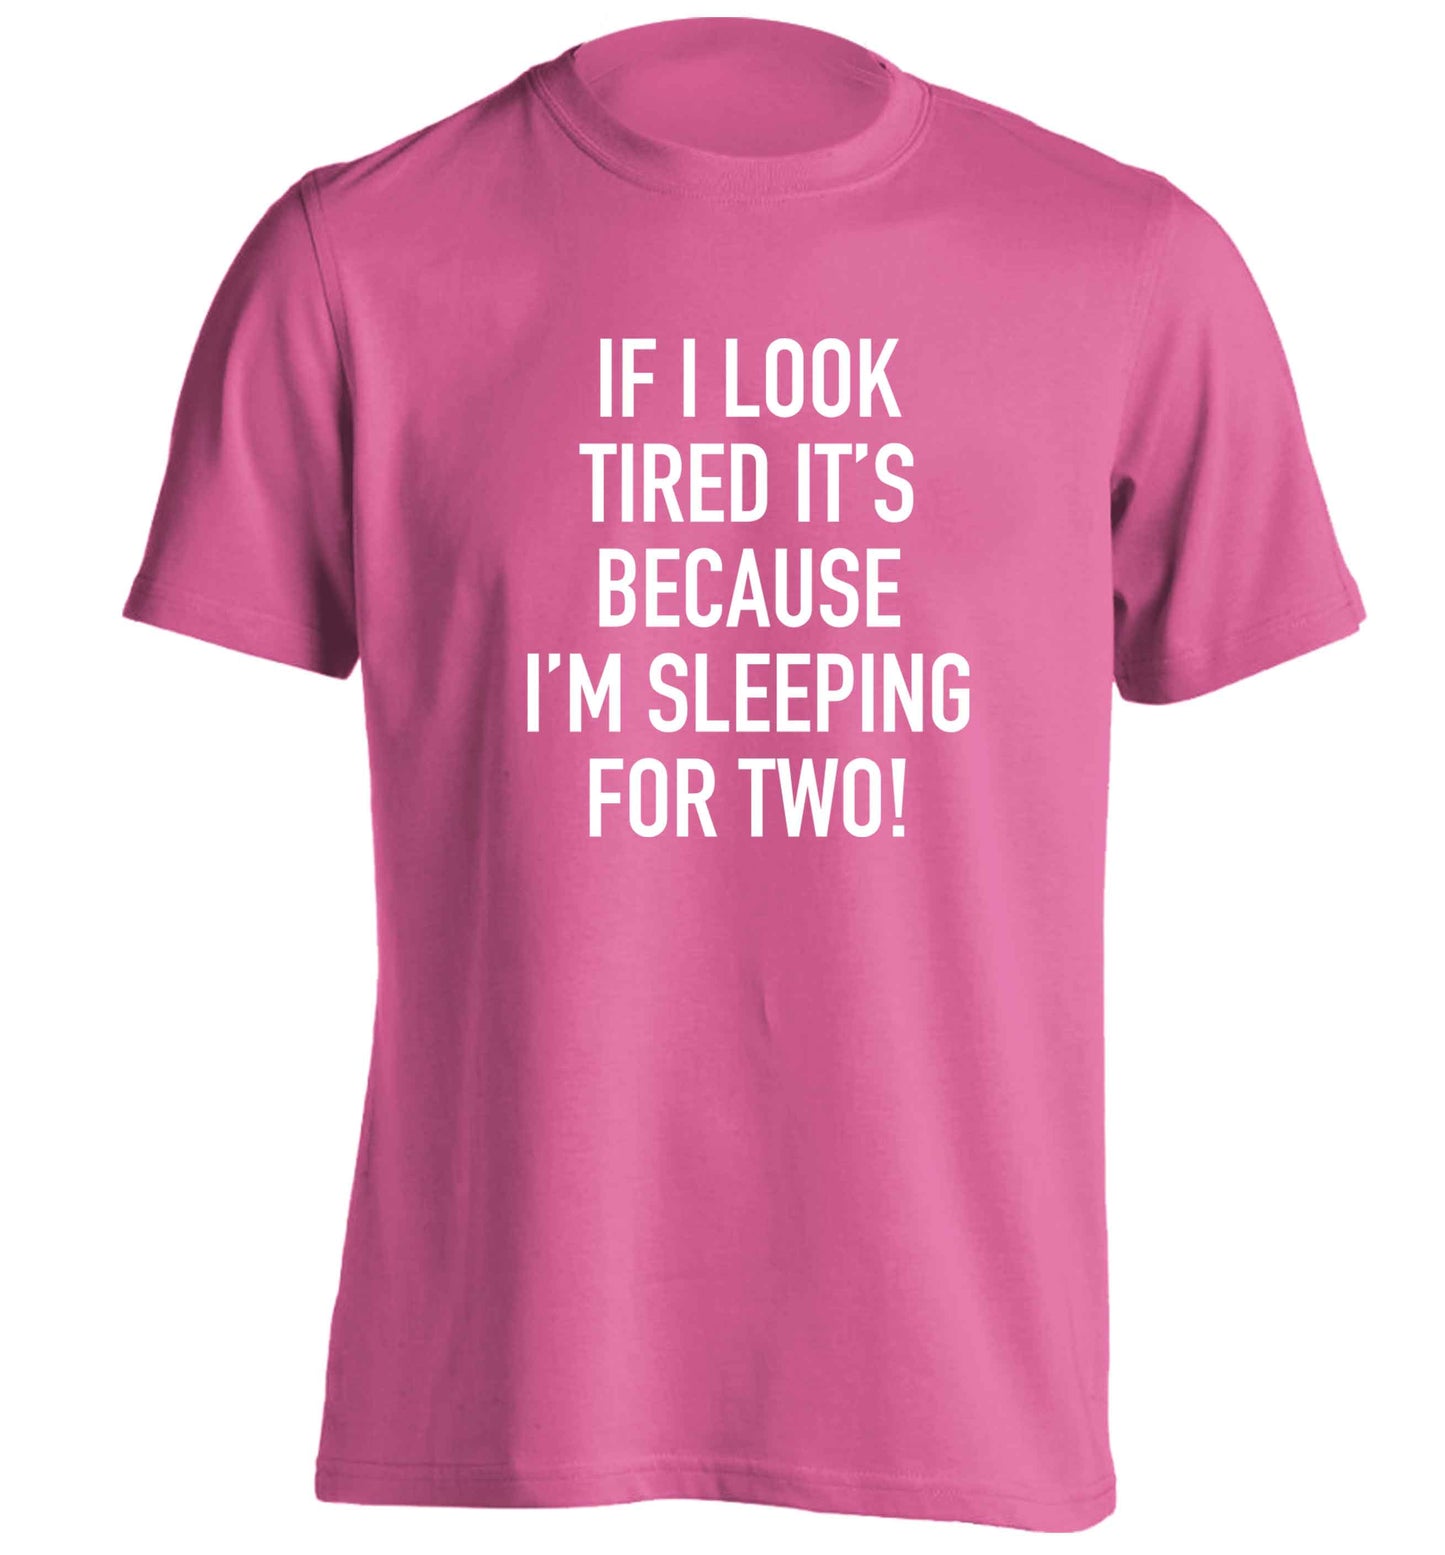 If I look tired it's because I'm sleeping for two adults unisex pink Tshirt 2XL